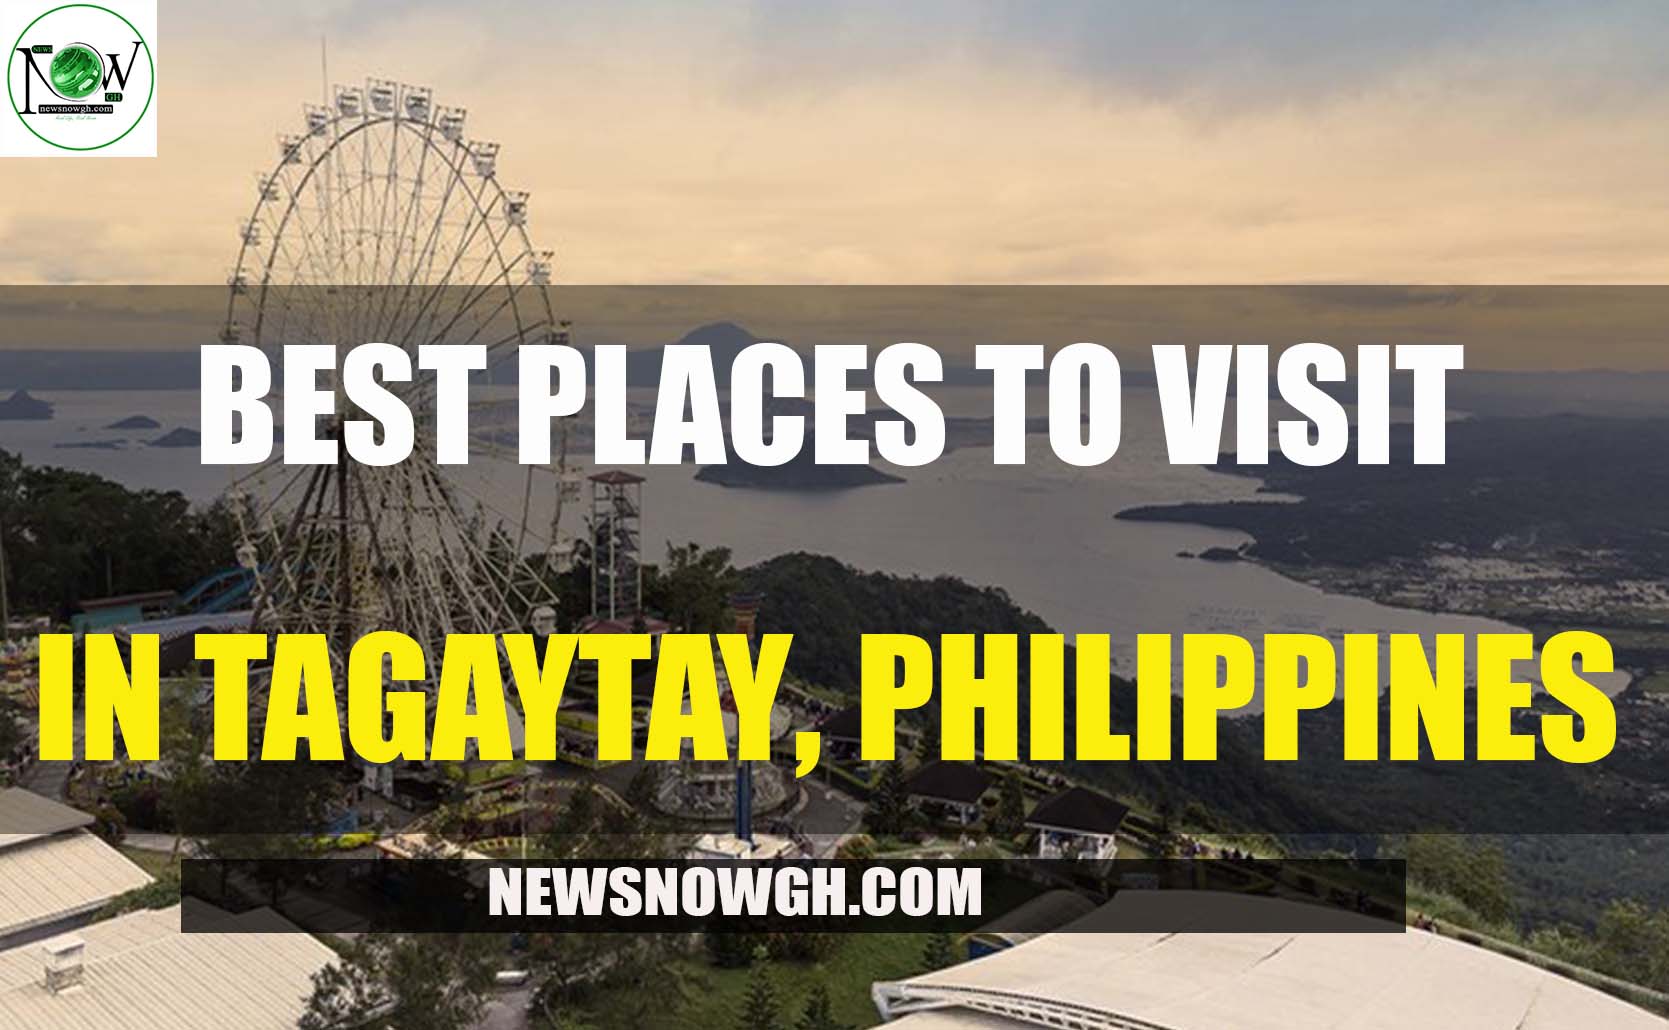 Best Places to Visit in Tagaytay, Philippines